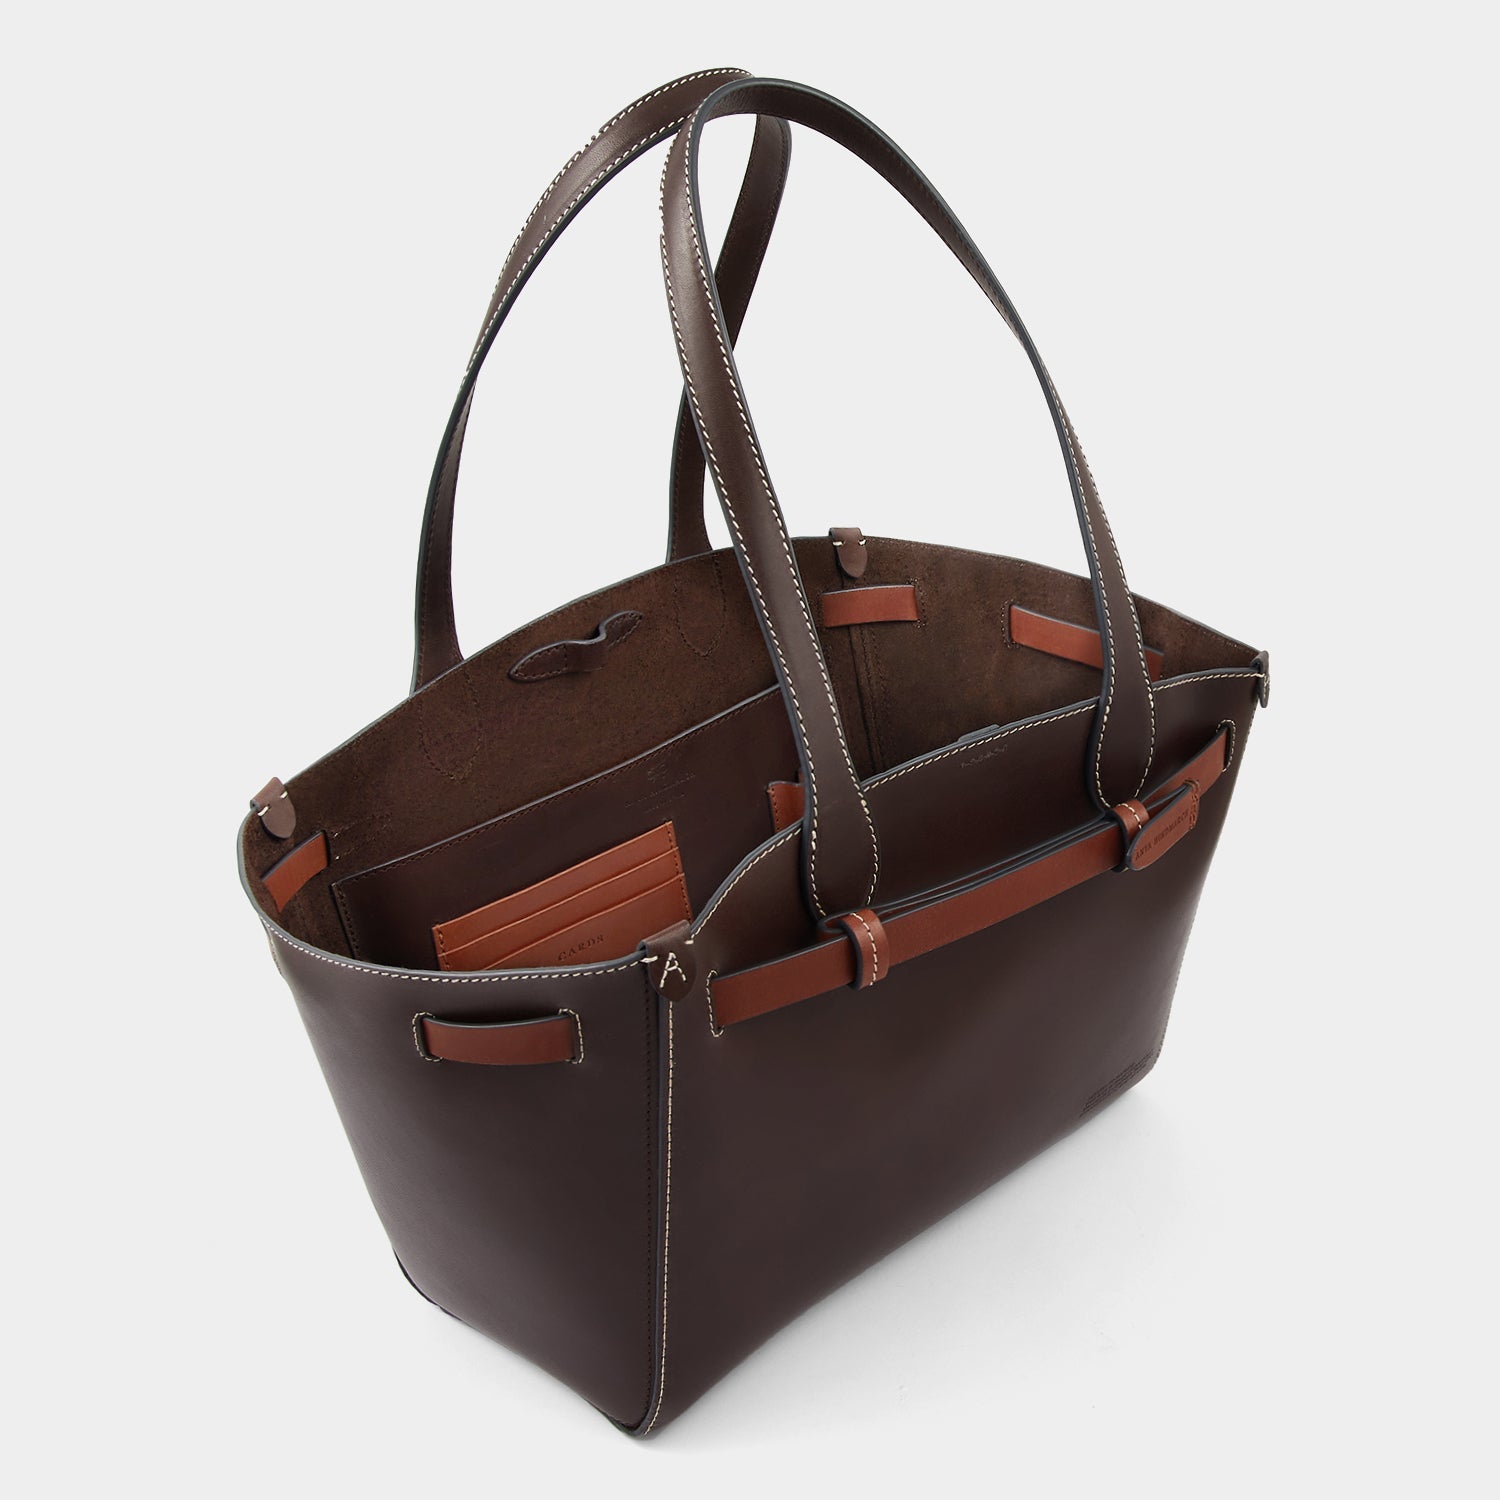 Return to Nature Tote Small -

                  
                    Compostable Leather in Cigar -
                  

                  Anya Hindmarch EU
